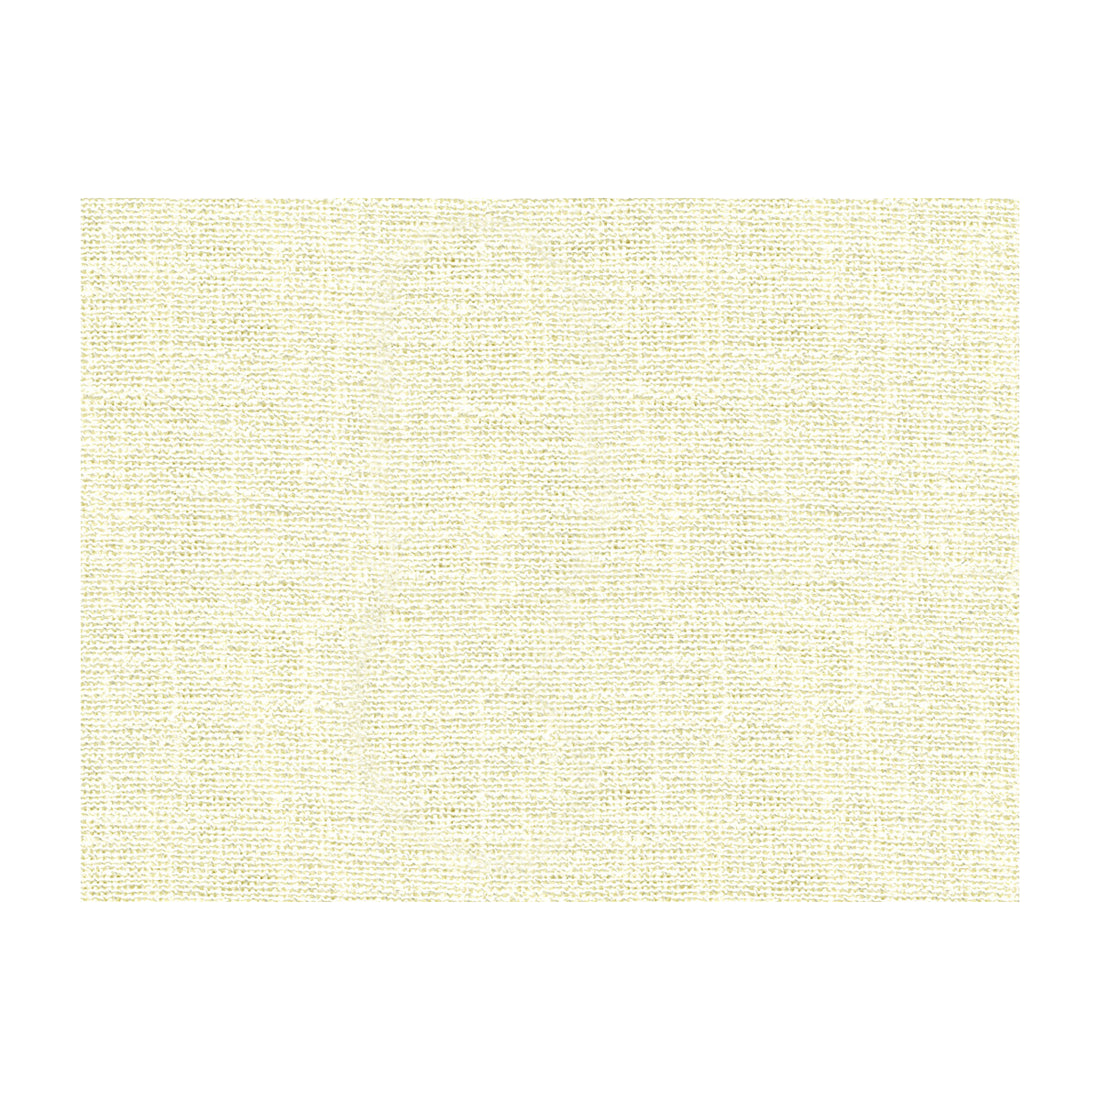 Dappled Boucle fabric in creme color - pattern 3977.1.0 - by Kravet Couture in the Michael Berman II Collection collection